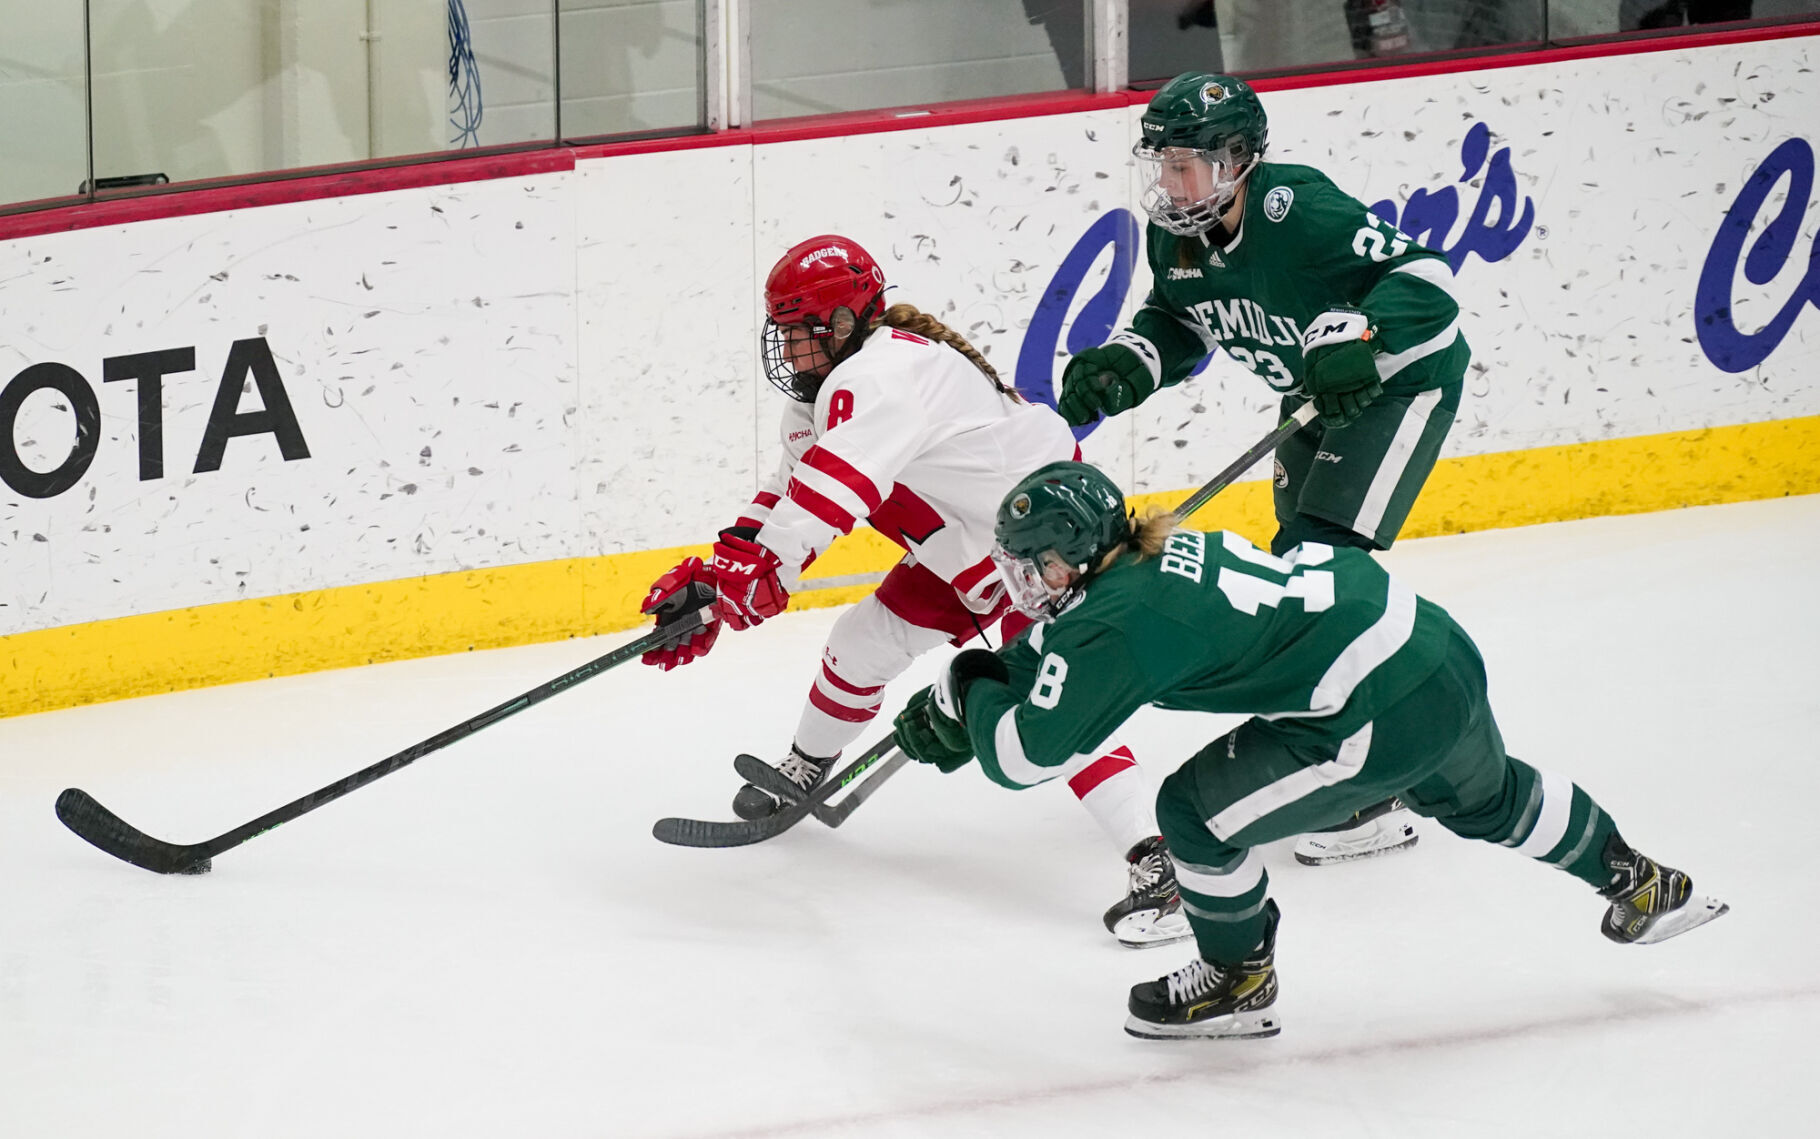 Wisconsin womens hockey team has one of its top scorers enter the transfer portal